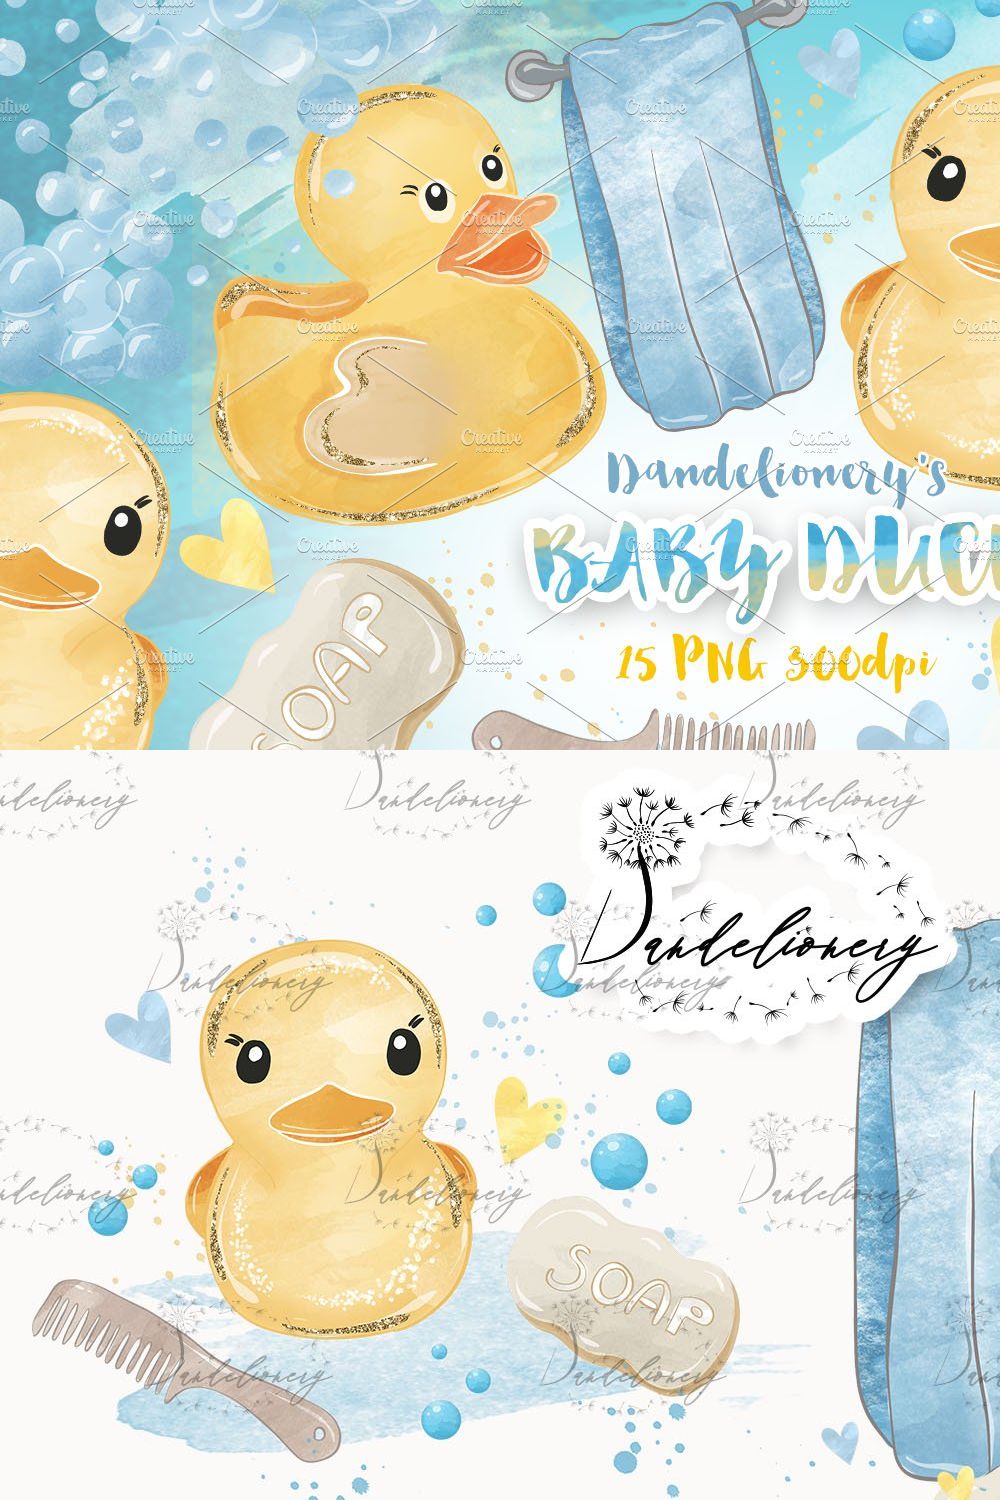 Baby Duck design pinterest preview image.